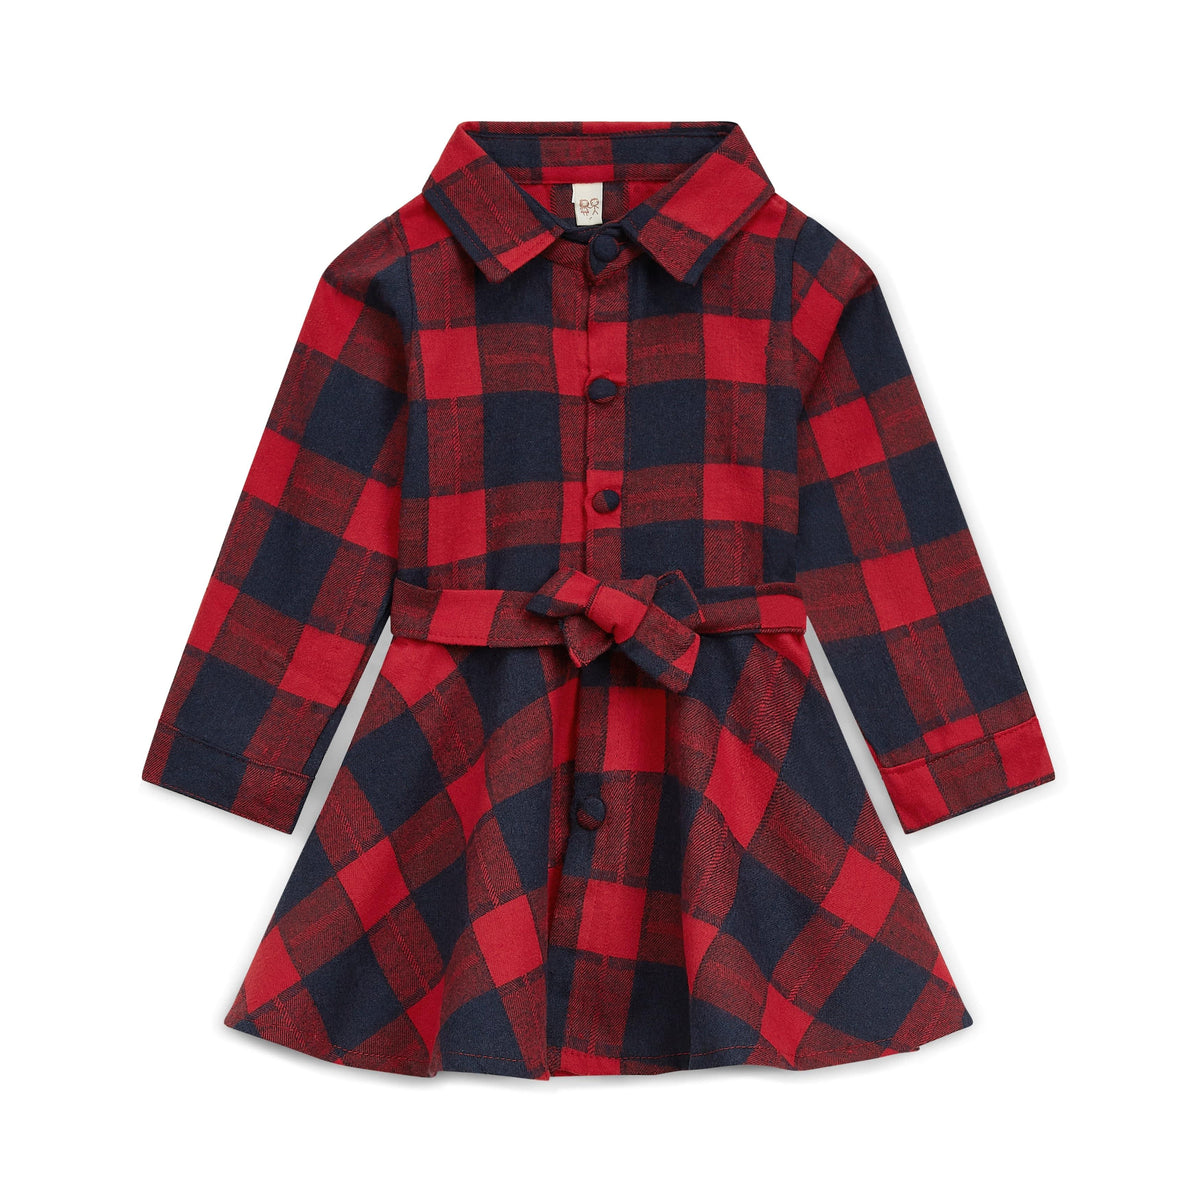 Colourful Childhood • Red & Black Plaid Dress - All Things Dylan